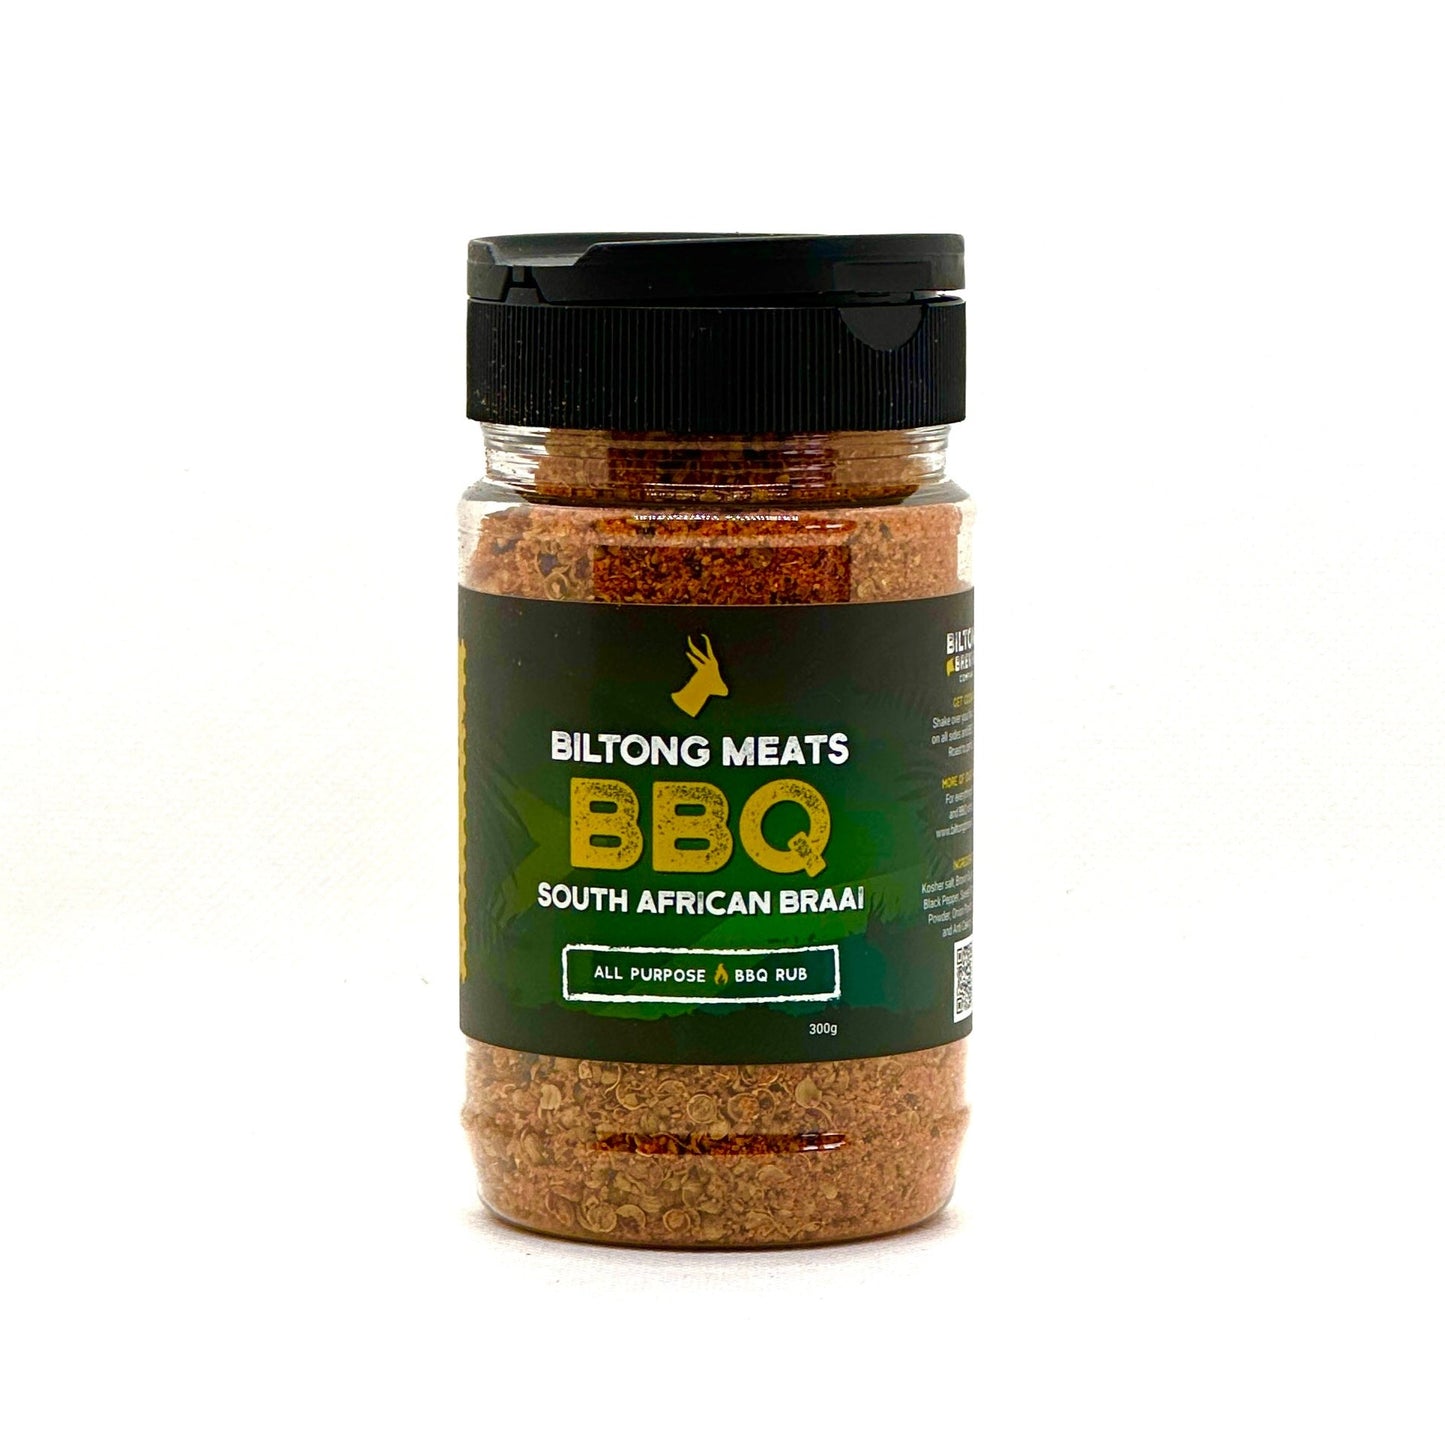 A close-up image of the Biltong Brewing Company 'Braai' BBQ Rub jar, showcasing the vibrant and colorful label with the product name and a glimpse of the rich, textured spices visible through the glass